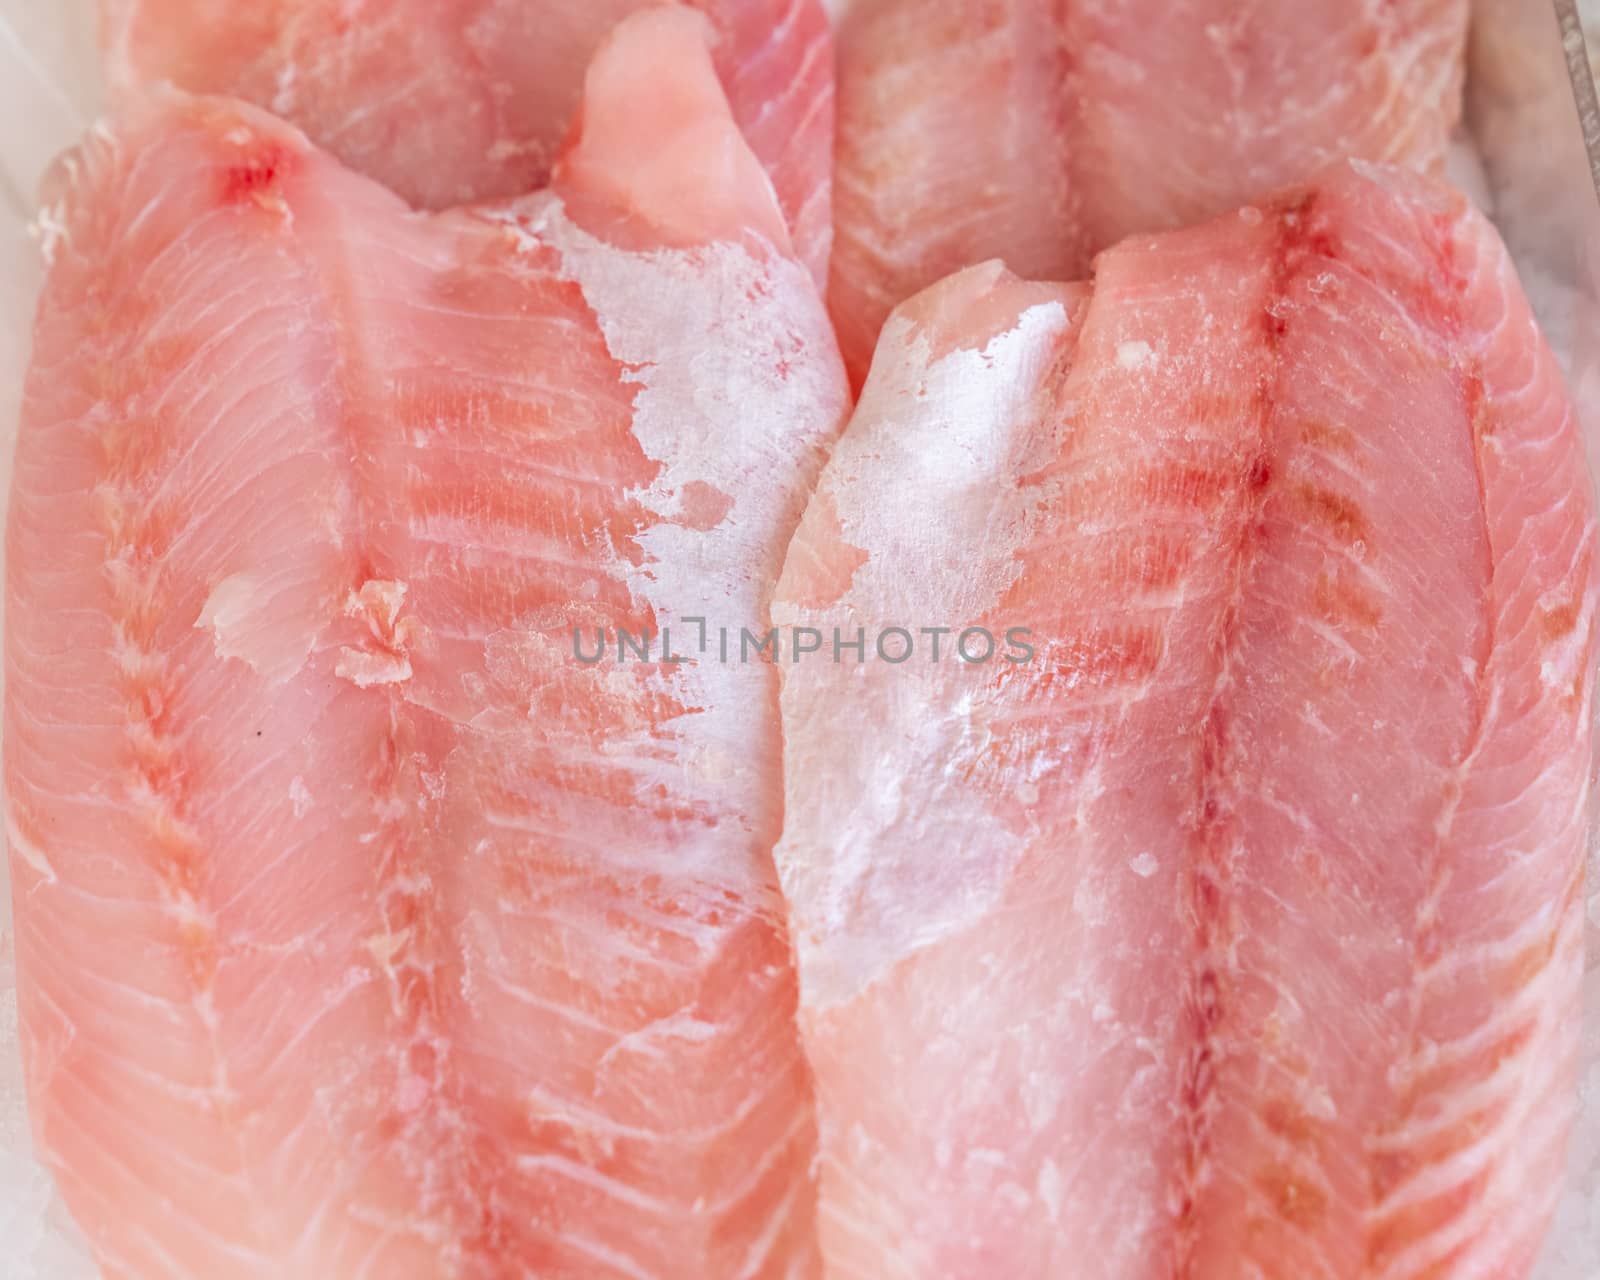 African perch fillet on ice close up by Robertobinetti70